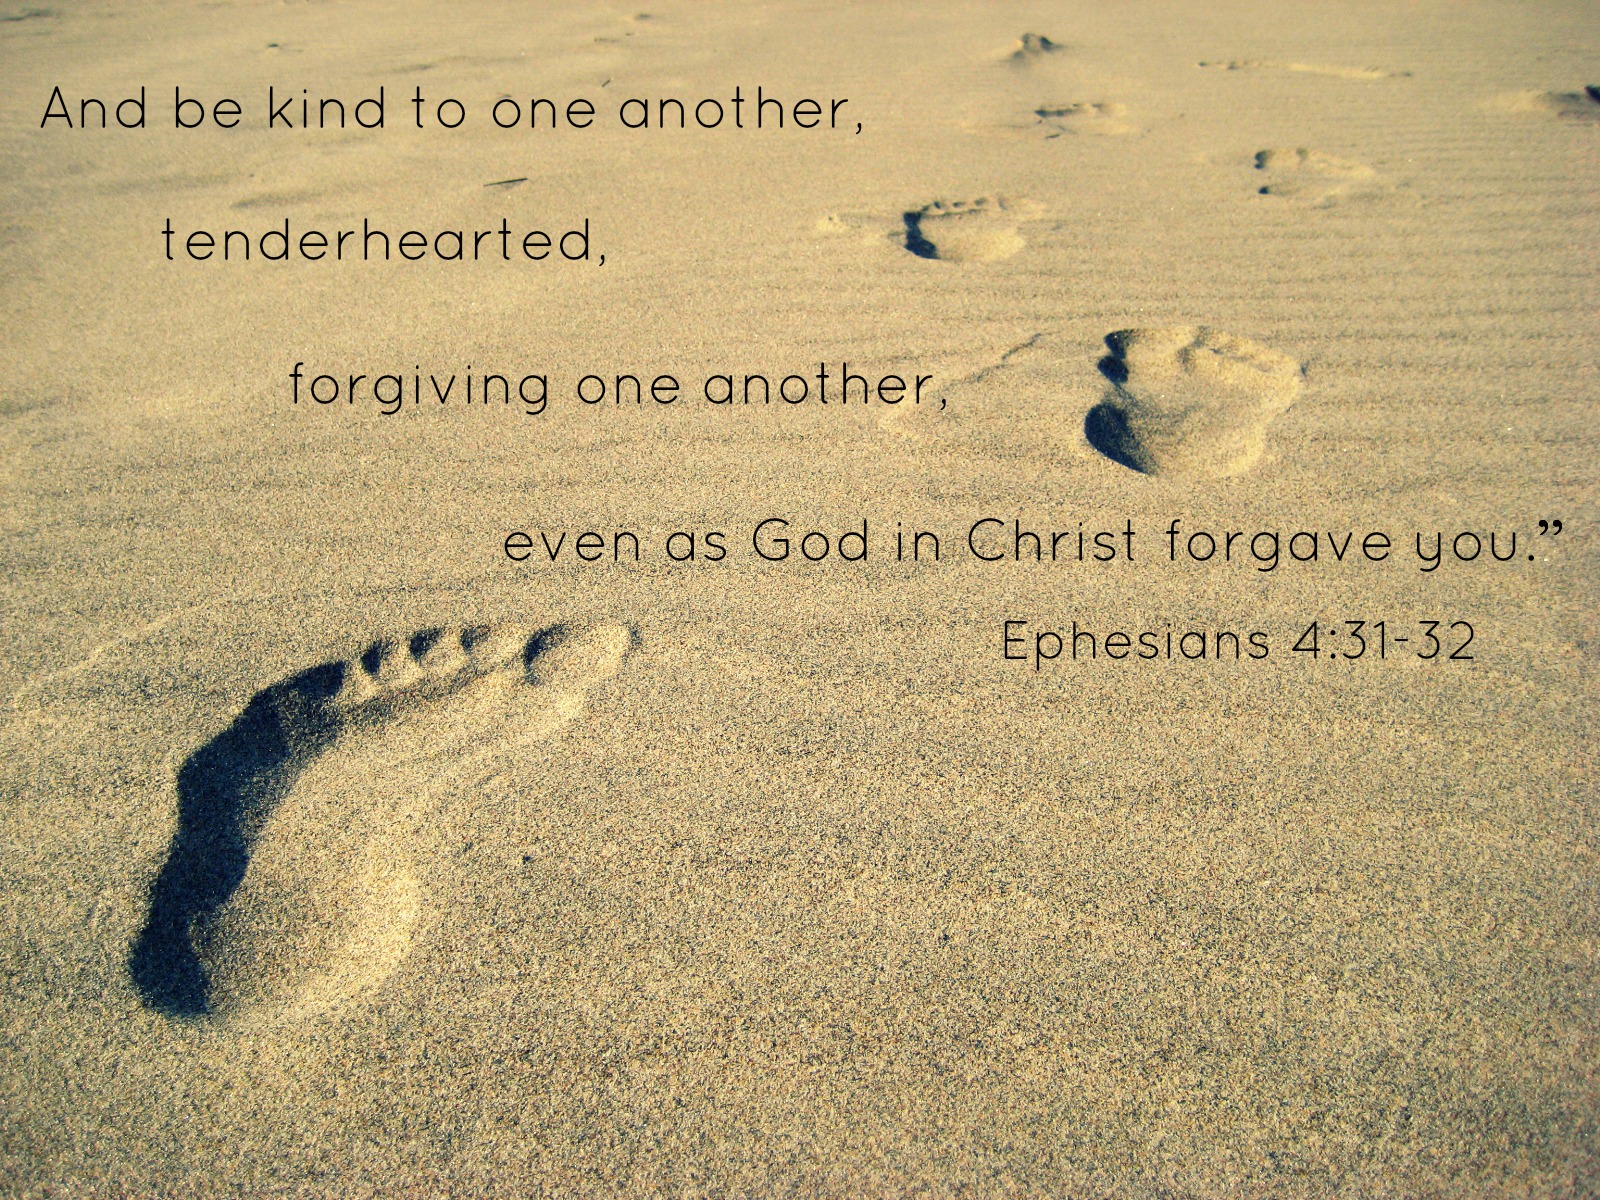 Found another one. Be kind to one another. Another one. To be kind. Forgiveness Sunday pictures.